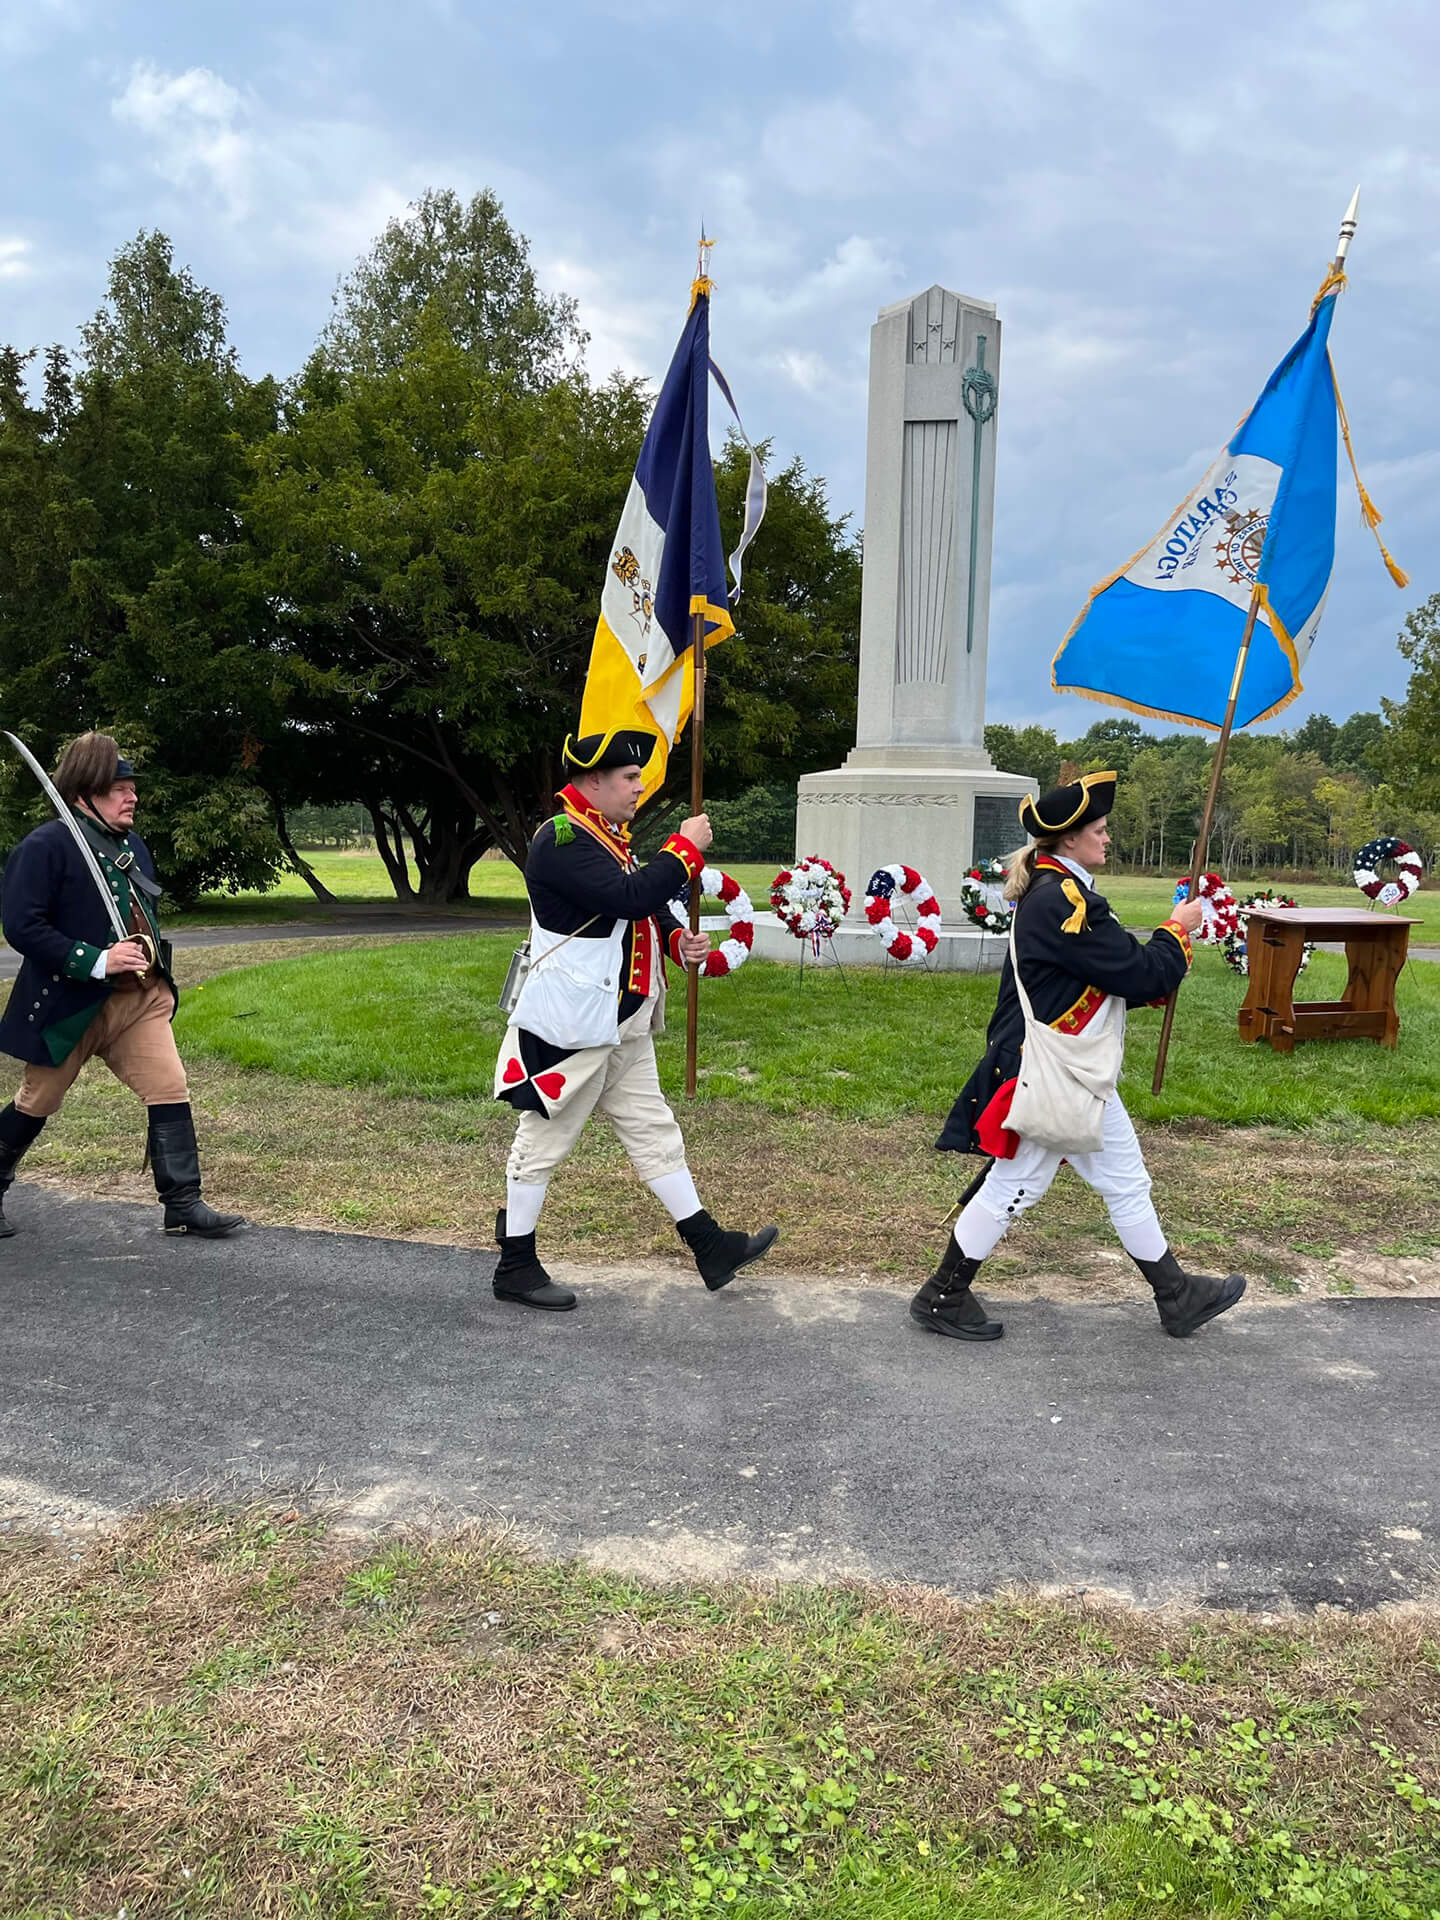 Three Revolutionary War reenactors marching with flags and swords near a monument